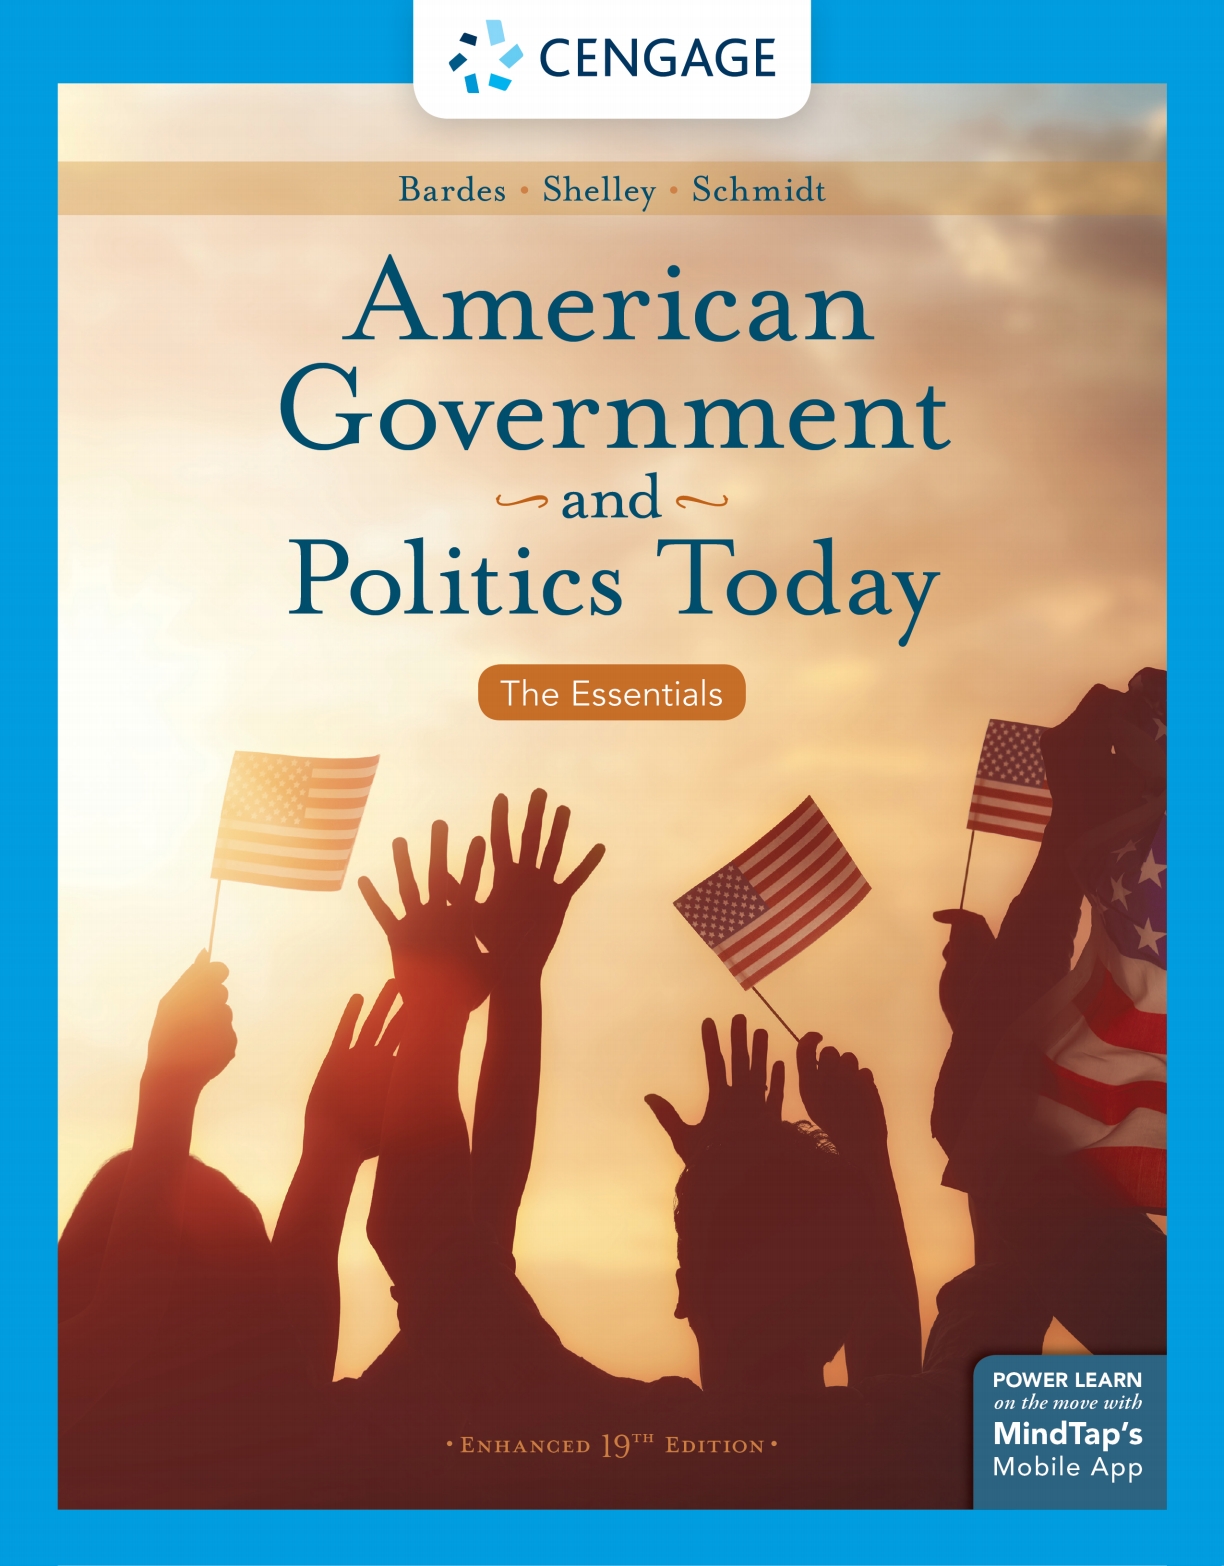 American Government and Politics Today: The Essentials (Enhanced 19th Edition) - eBook